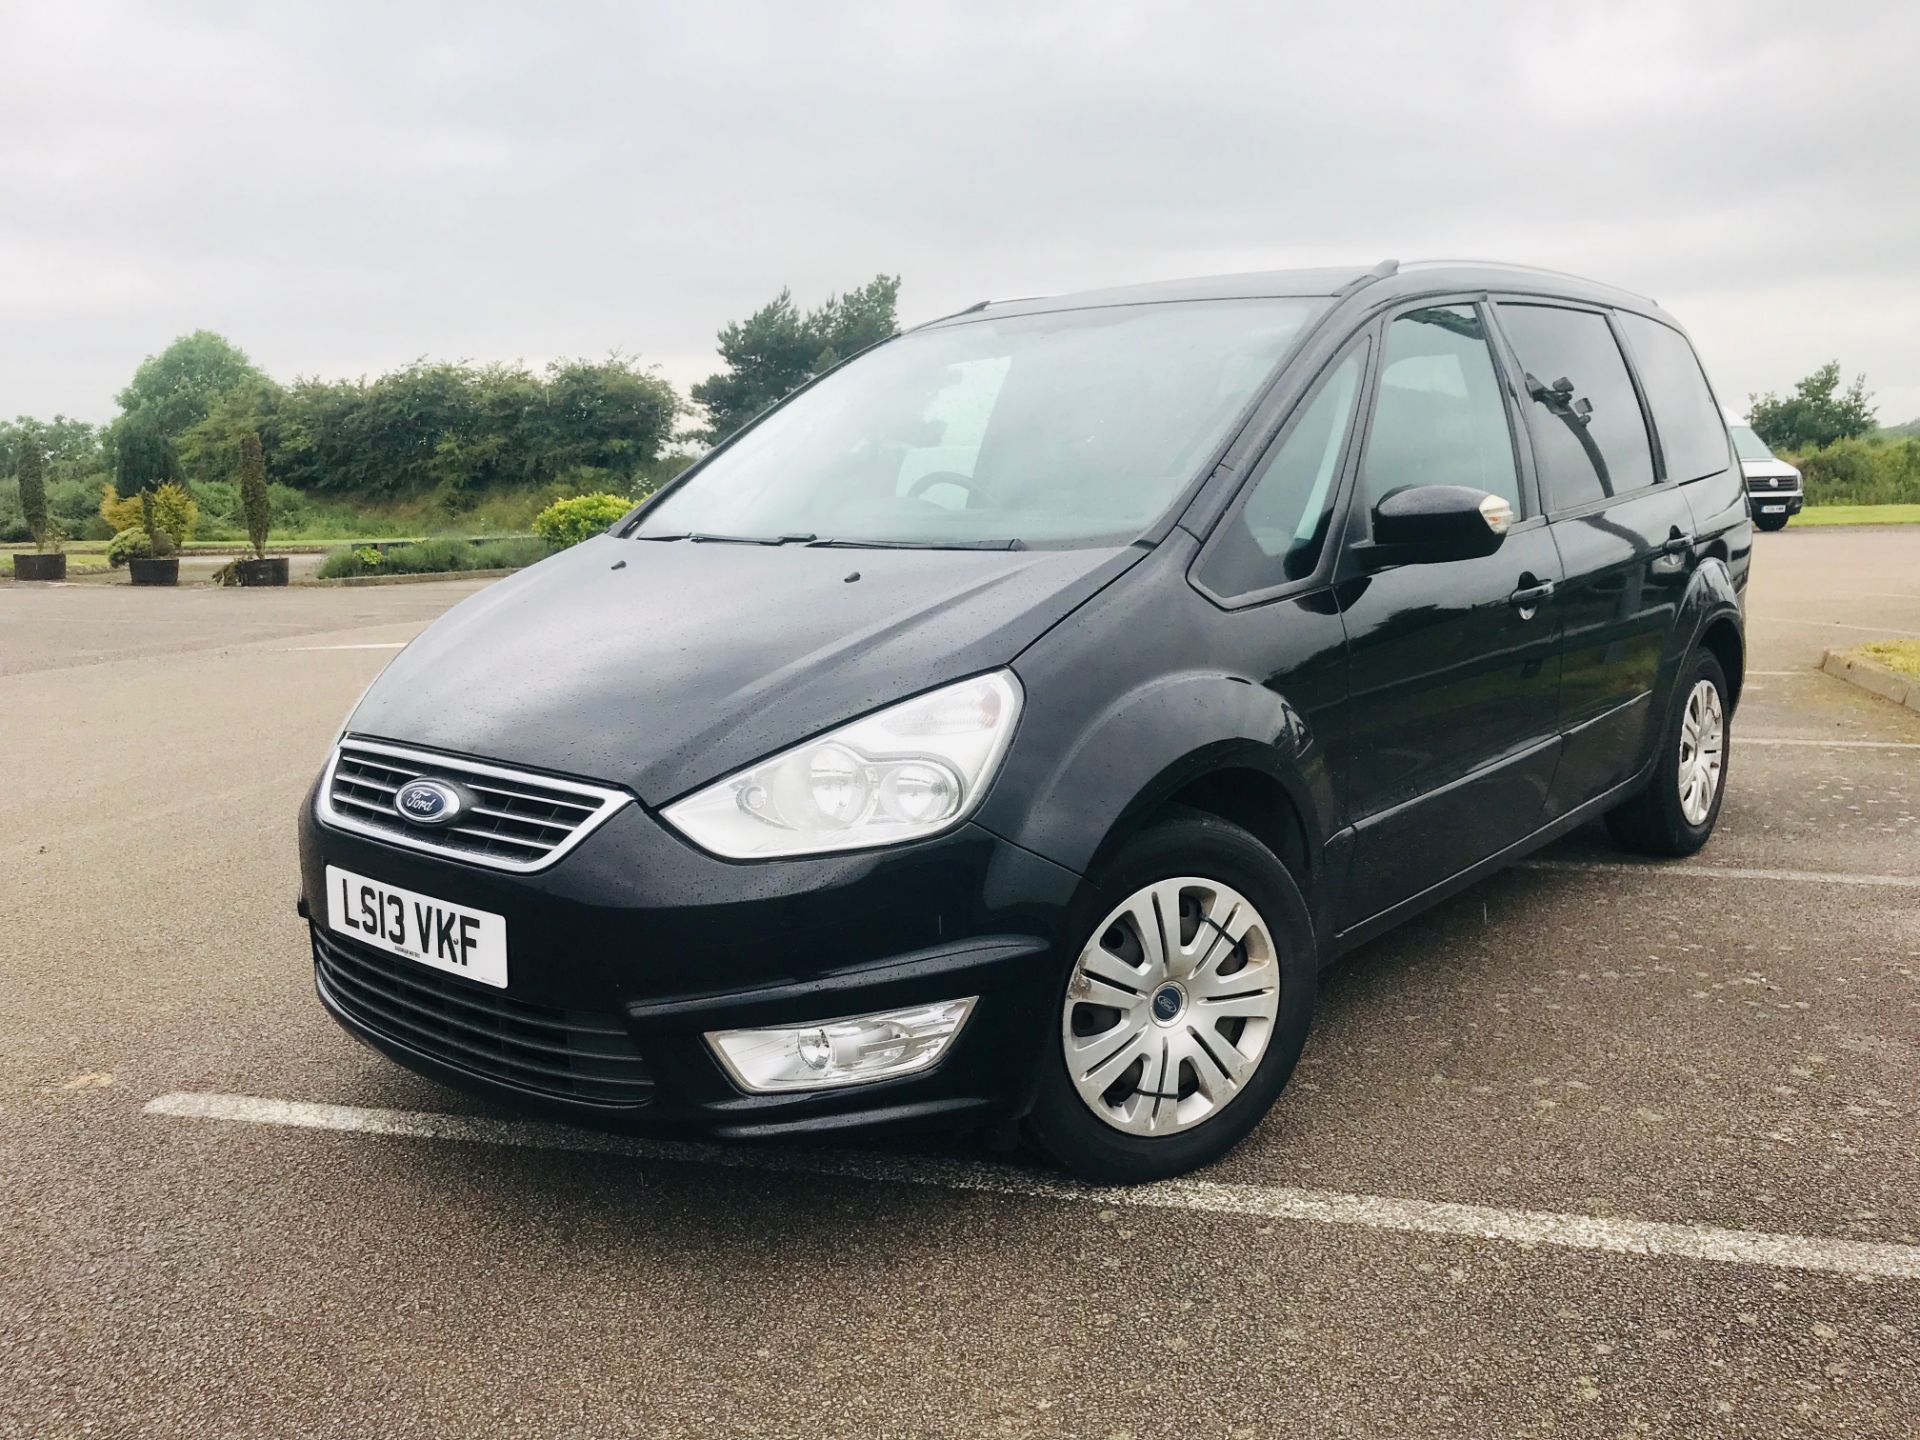 ON SALE FORD GALAXY 2.0TDCI POWER SHIFT "ZETEC" 7 SEATER (13 REG) AIR CON - ELEC PACK - AUTOMATIC